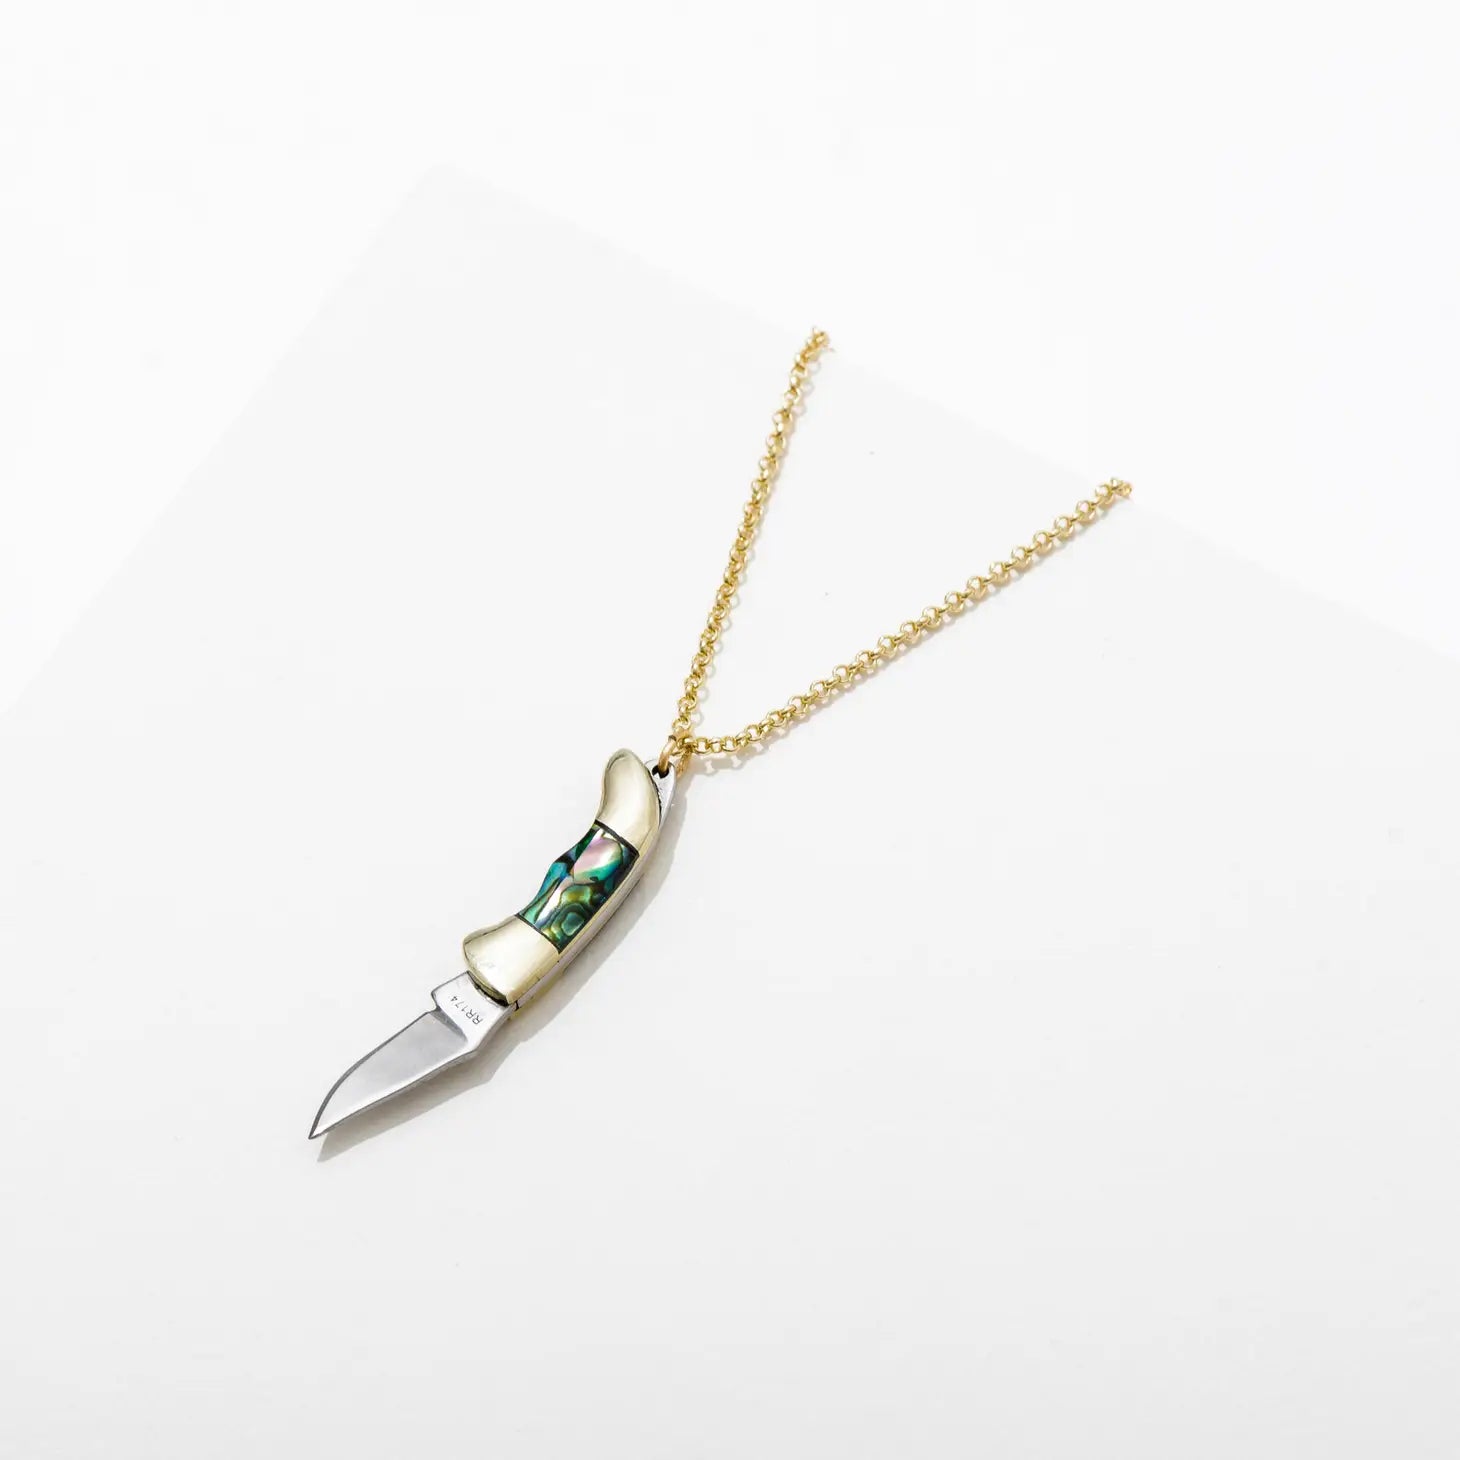 Judith Gold Abalone Necklace